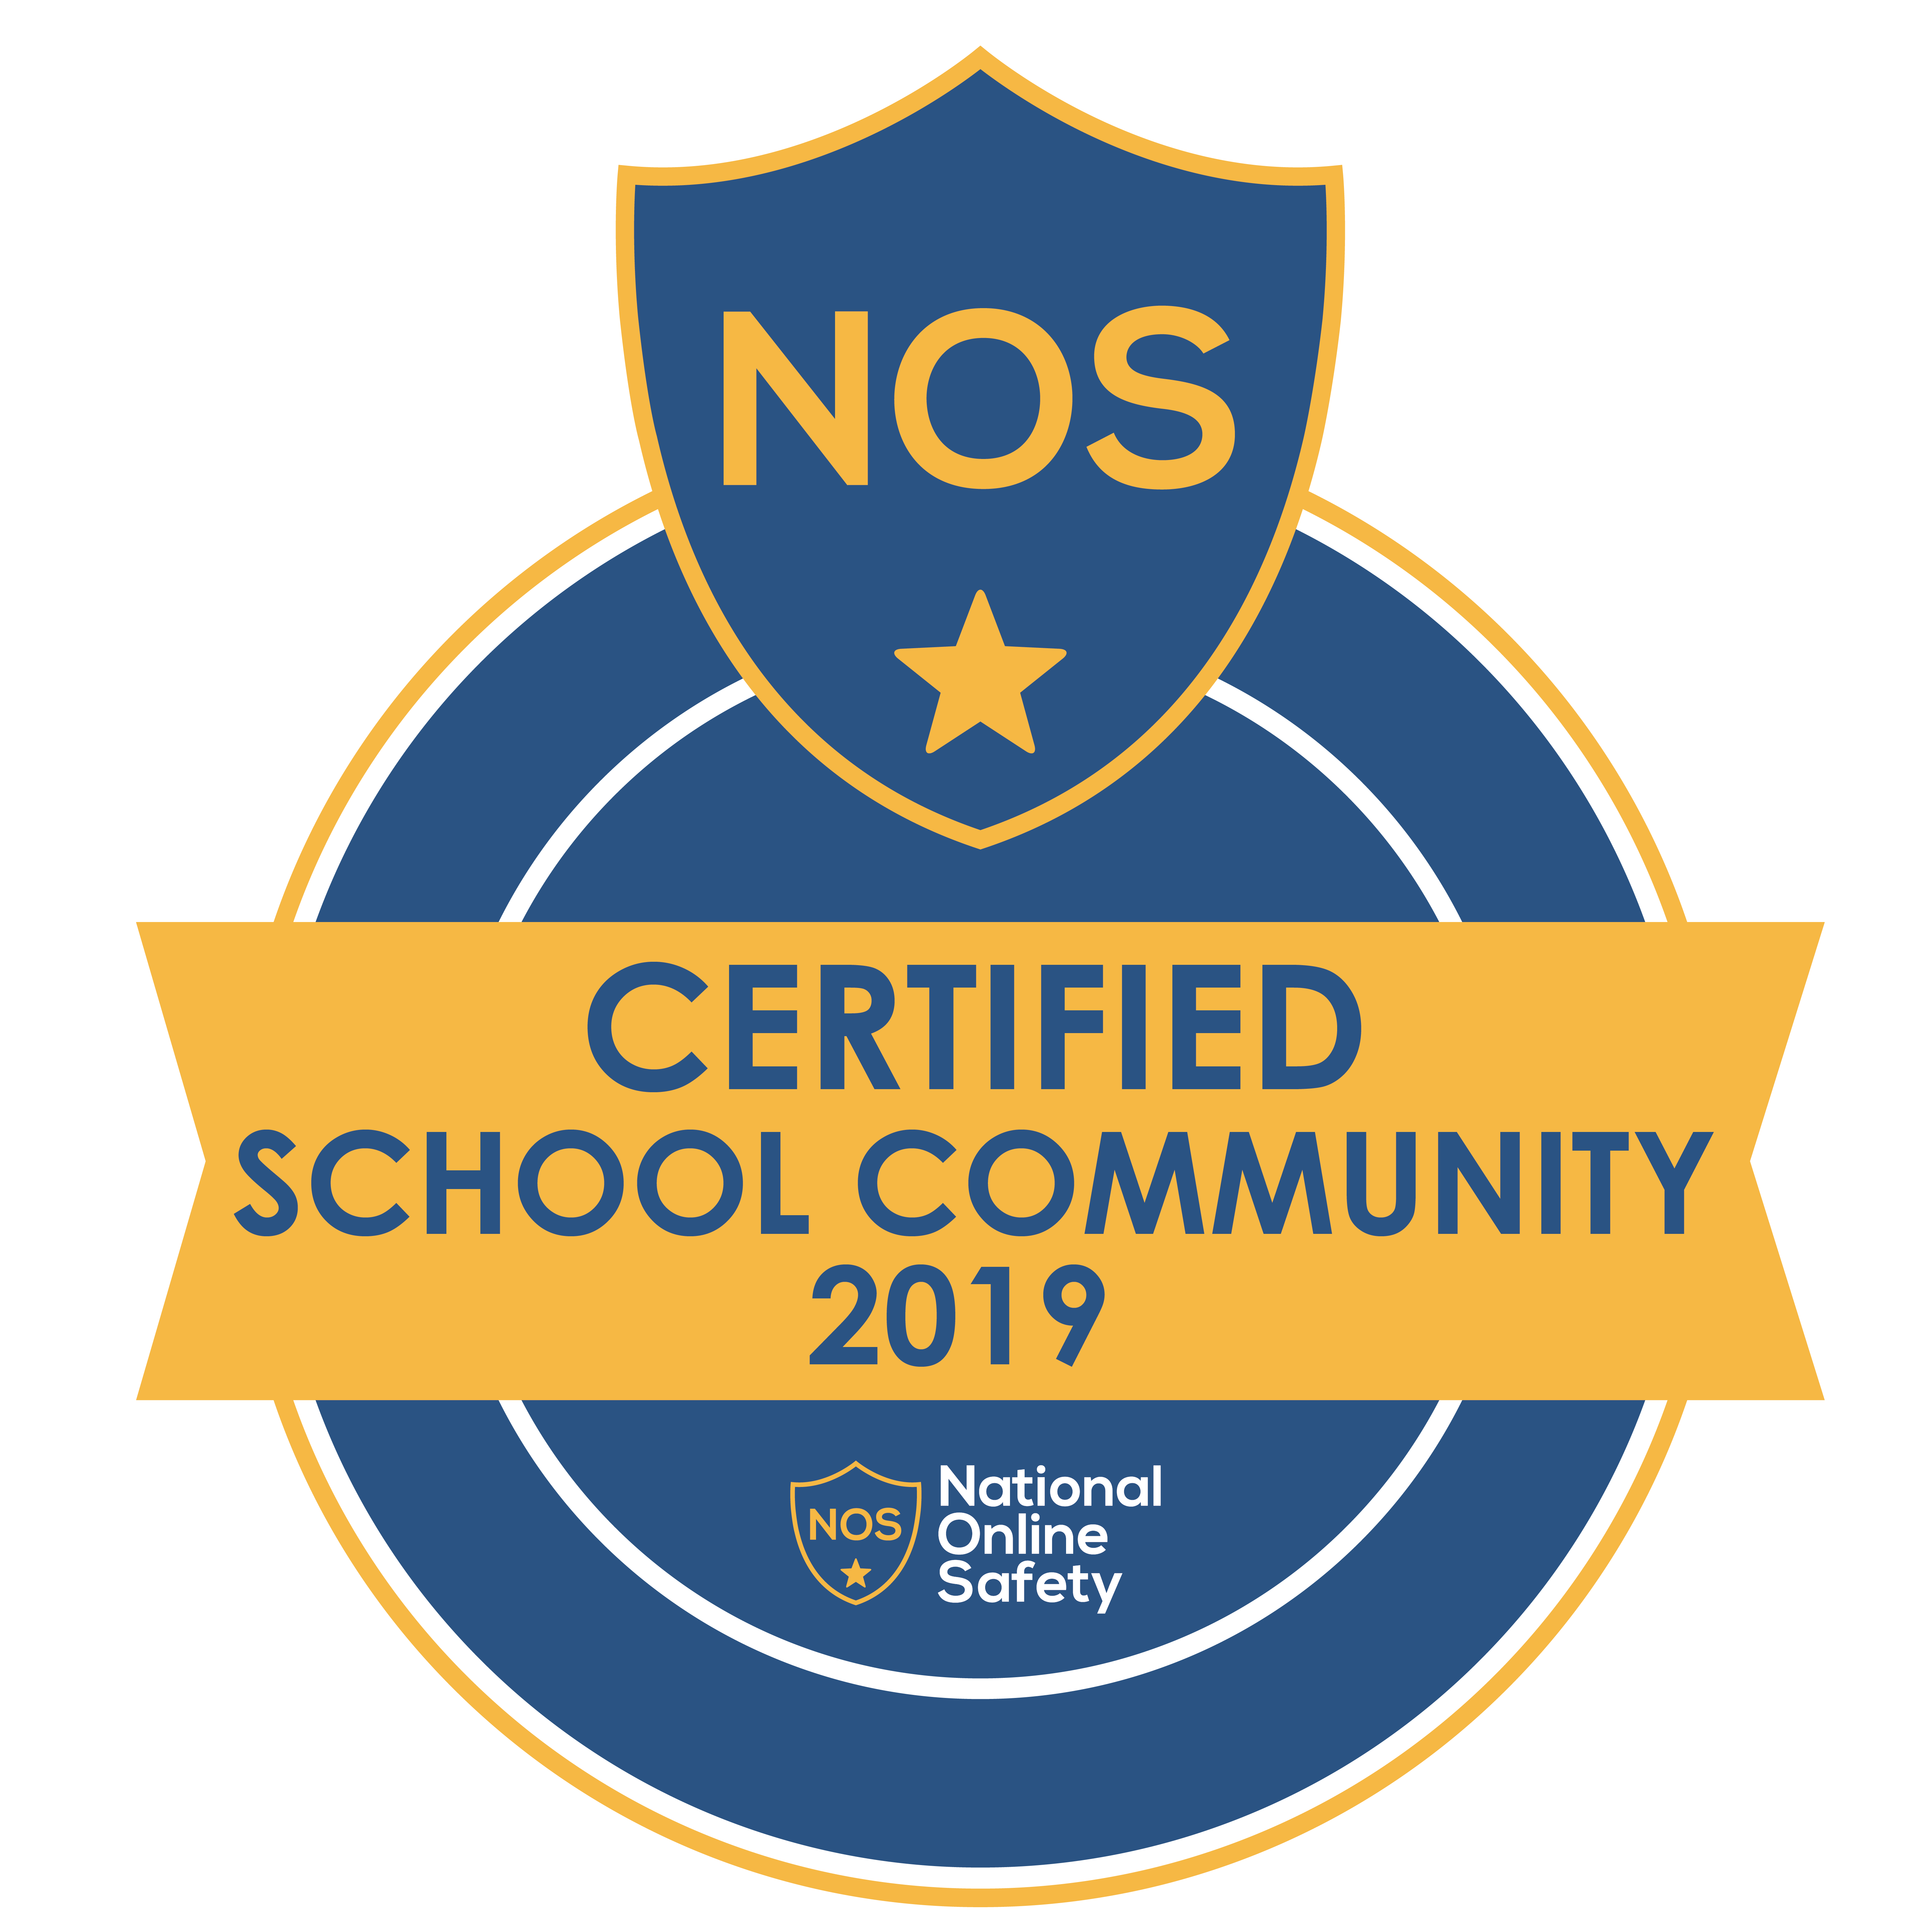 National Online Safety Certified School Community 2019